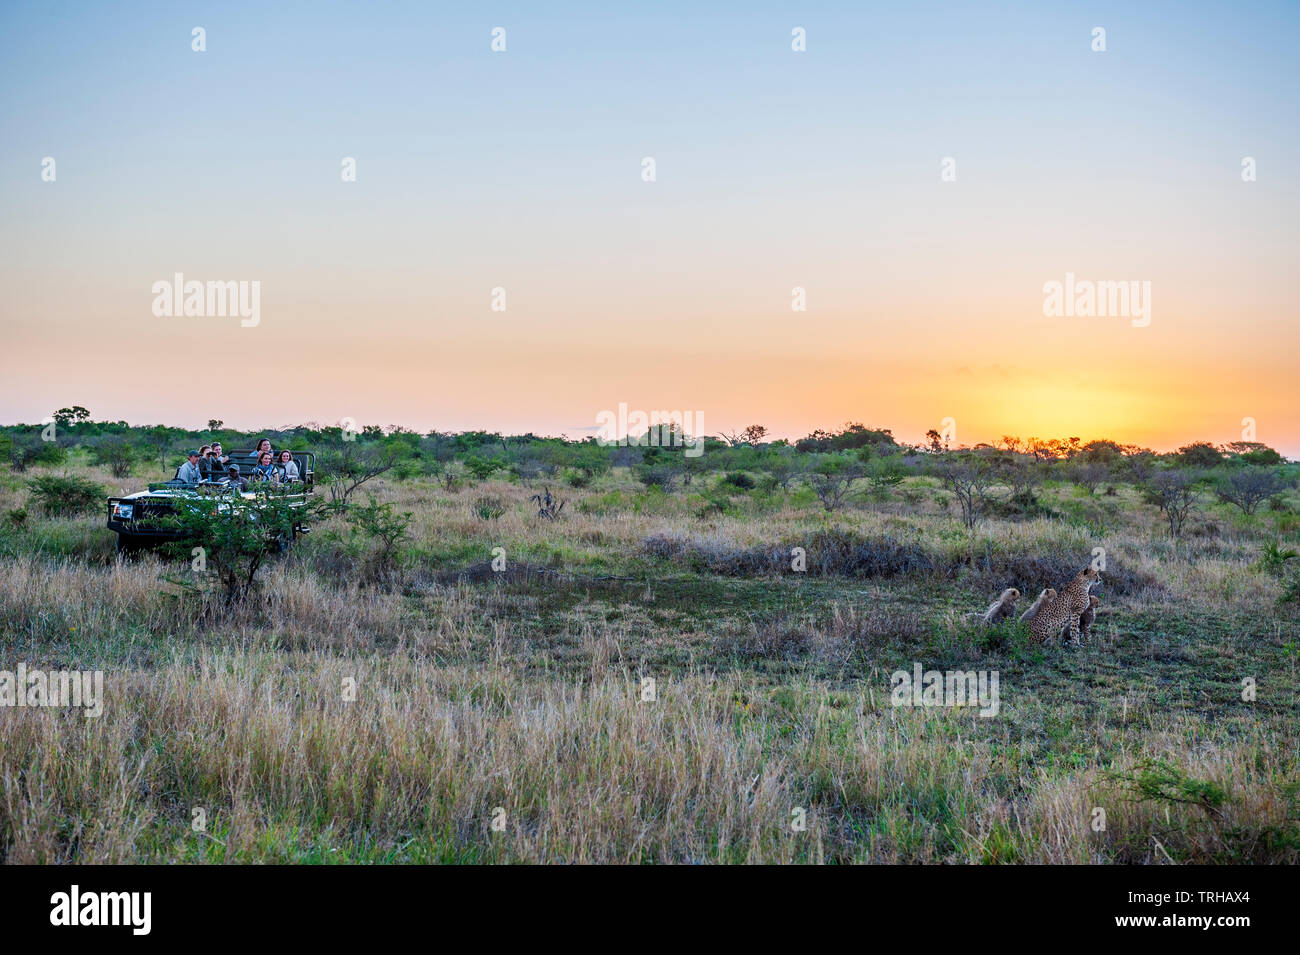 Tourists watching a mother cheetah and her cubs at the Phinda Private Game Reserve, an andBeyond owned nature reserve in eastern South Africa. Stock Photo